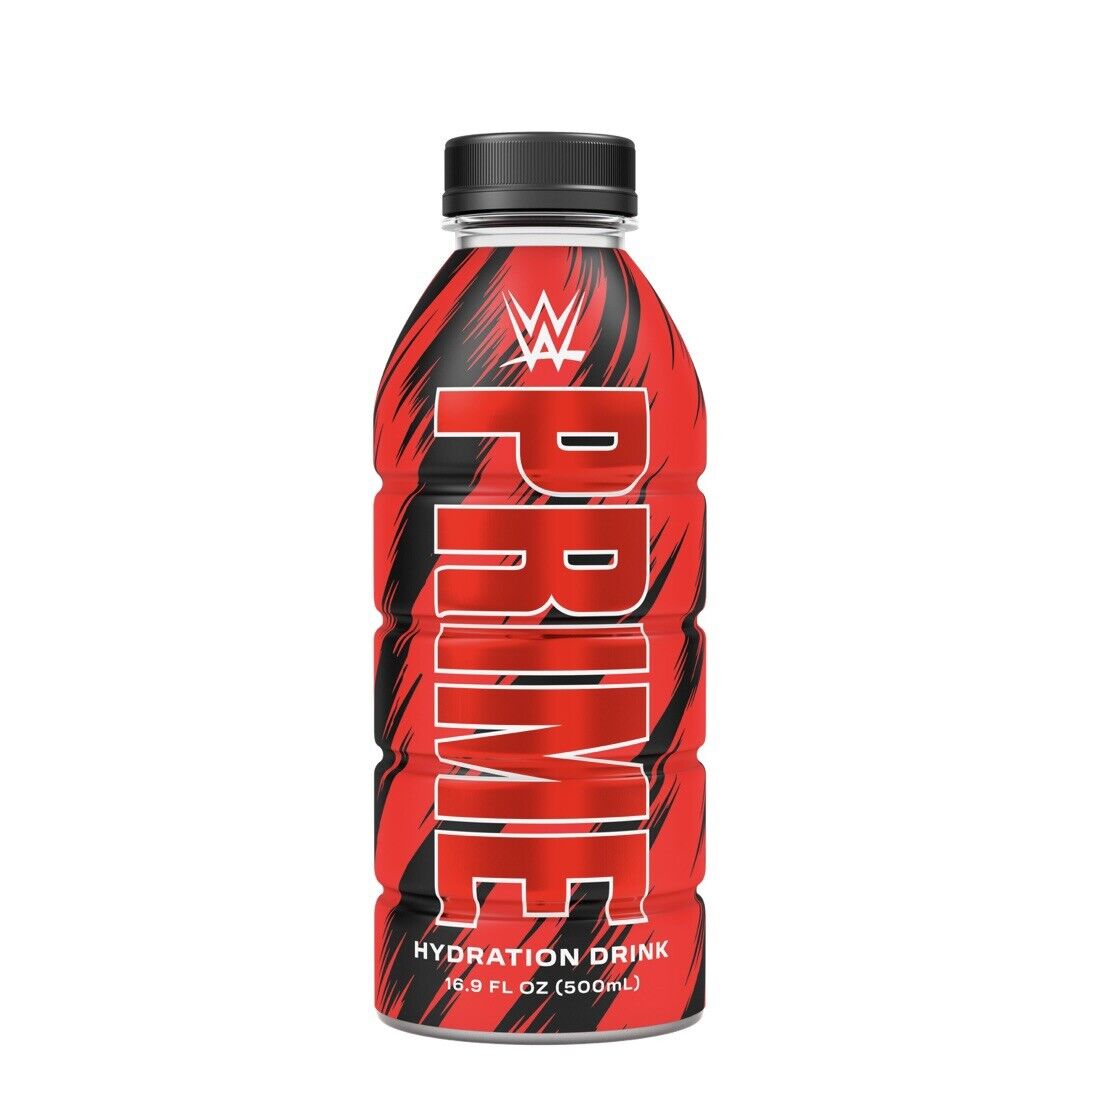 Prime Hydration x WWE Red & Black | US SELLER | IN HAND NOW